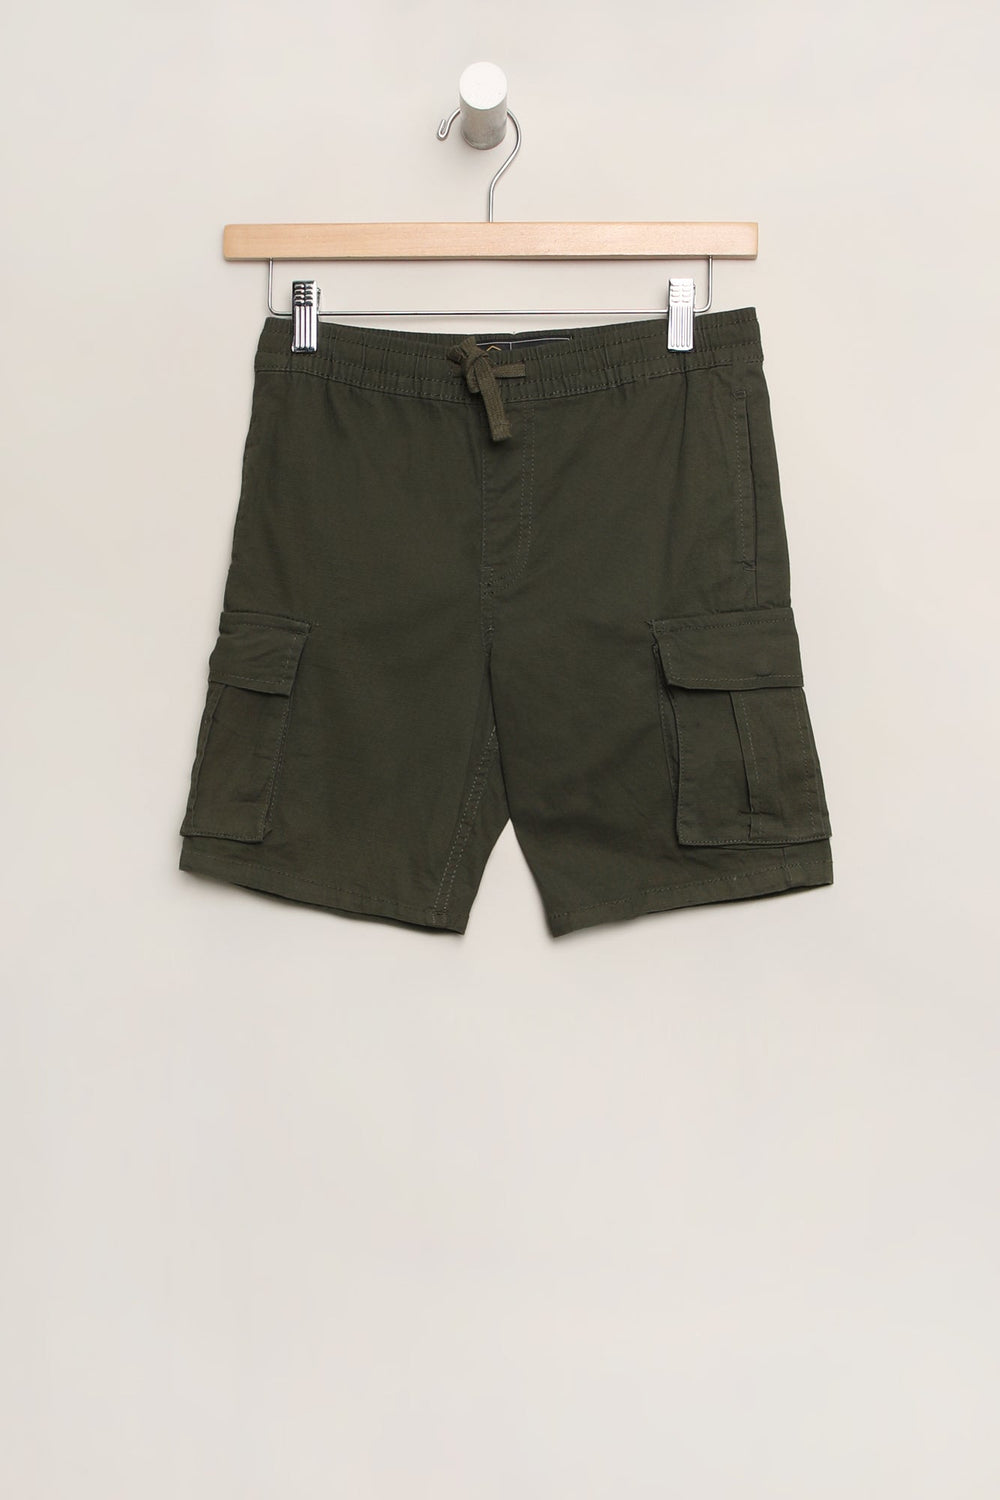 West49 Youth Solid Colour Cargo Jogger Short West49 Youth Solid Colour Cargo Jogger Short